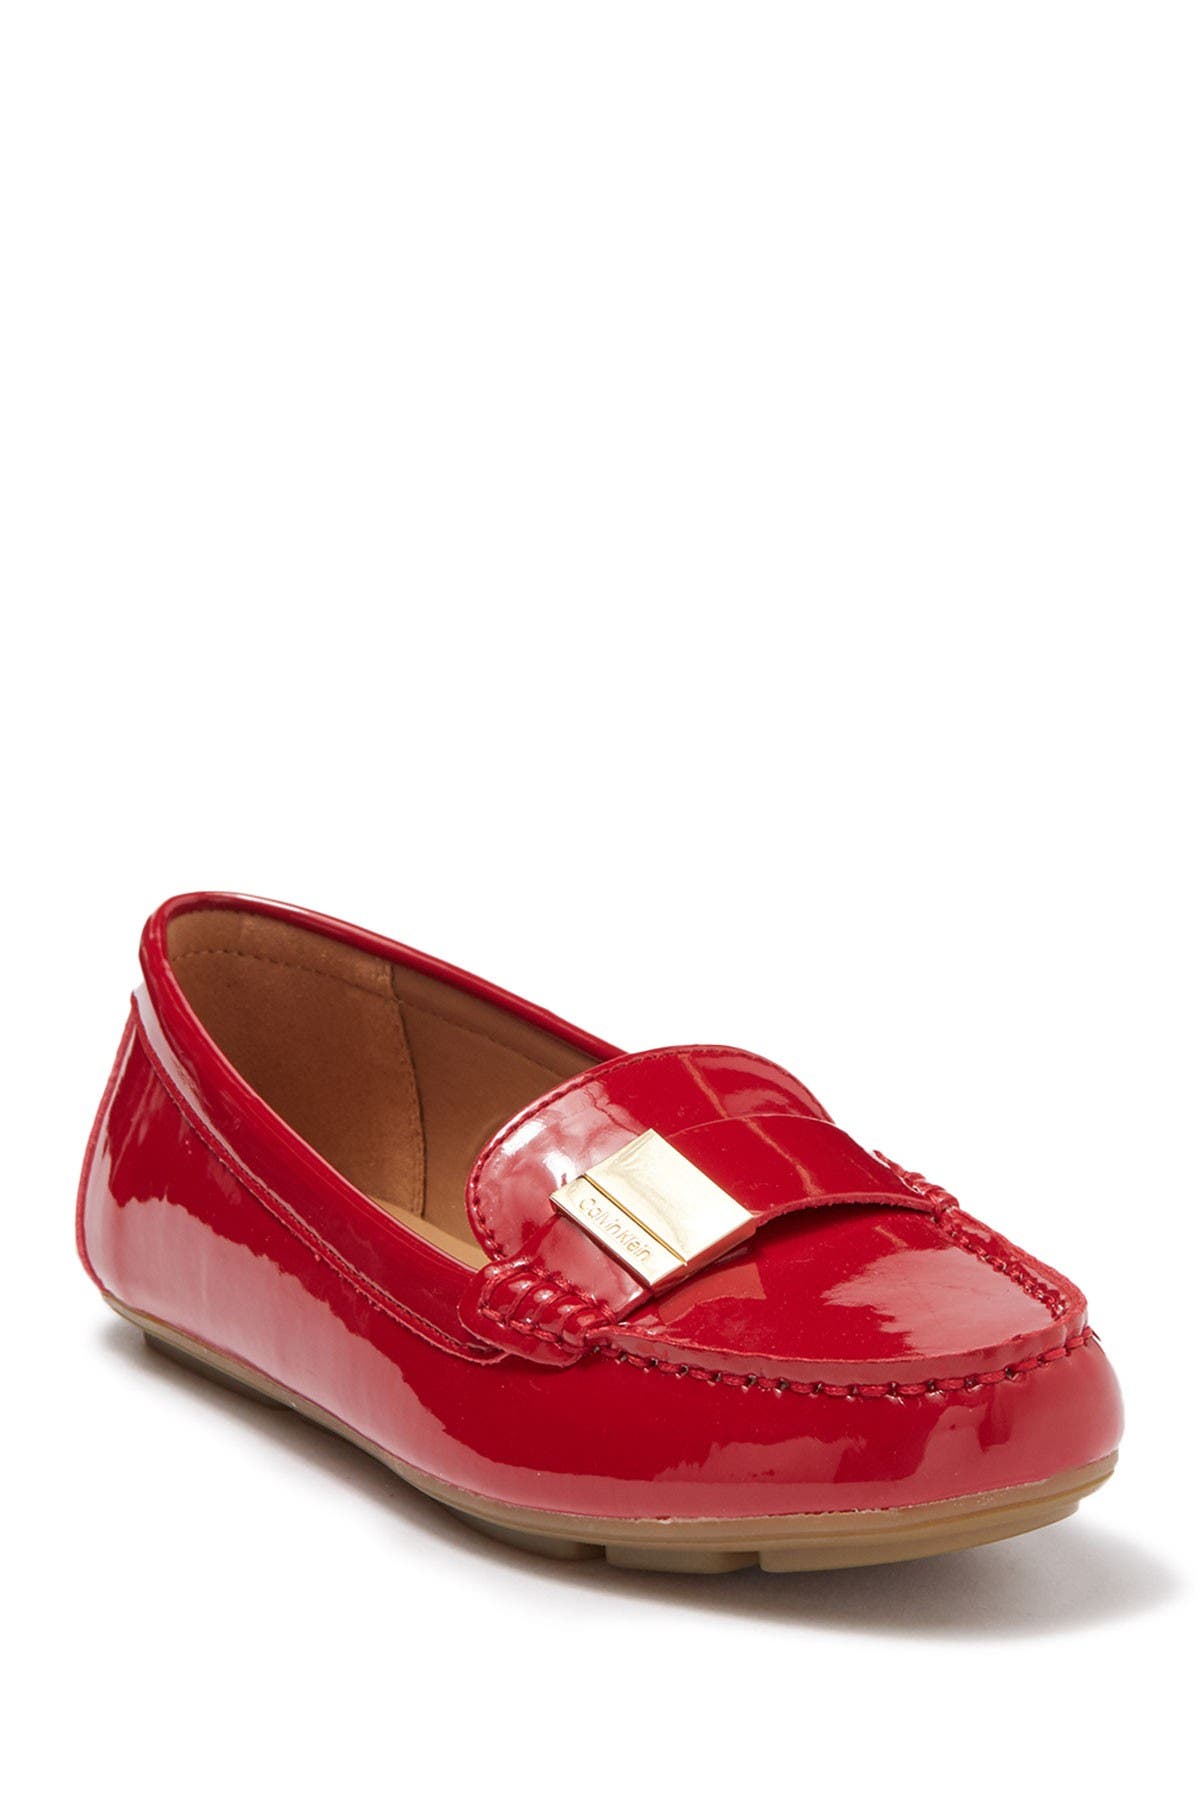 red calvin klein loafers